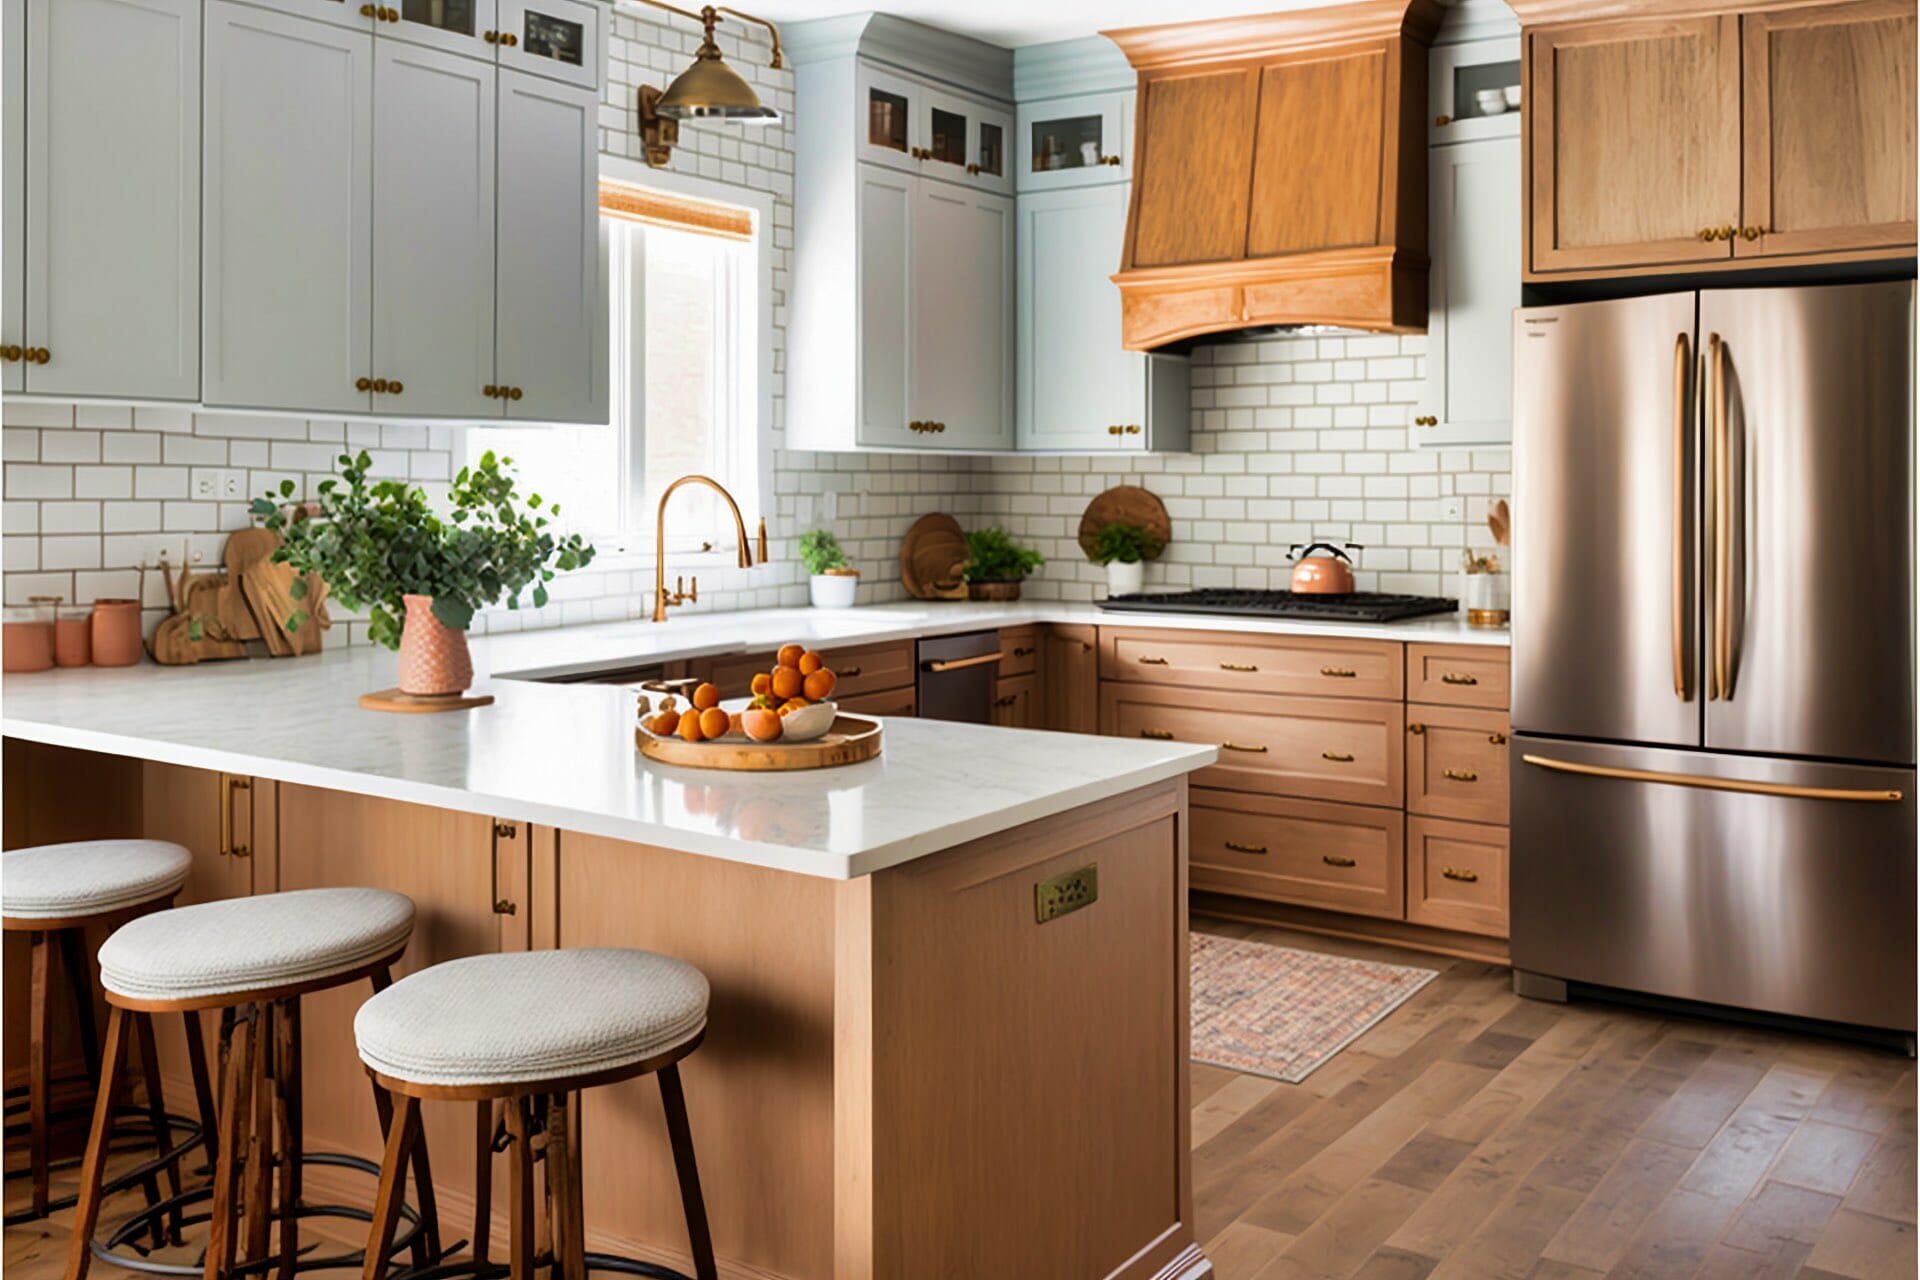 A Bright And Inviting Kitchen Featuring Pale Oak Cabinetry, Copper Hardware And Accents, And A White Subway Tile Backsplash.